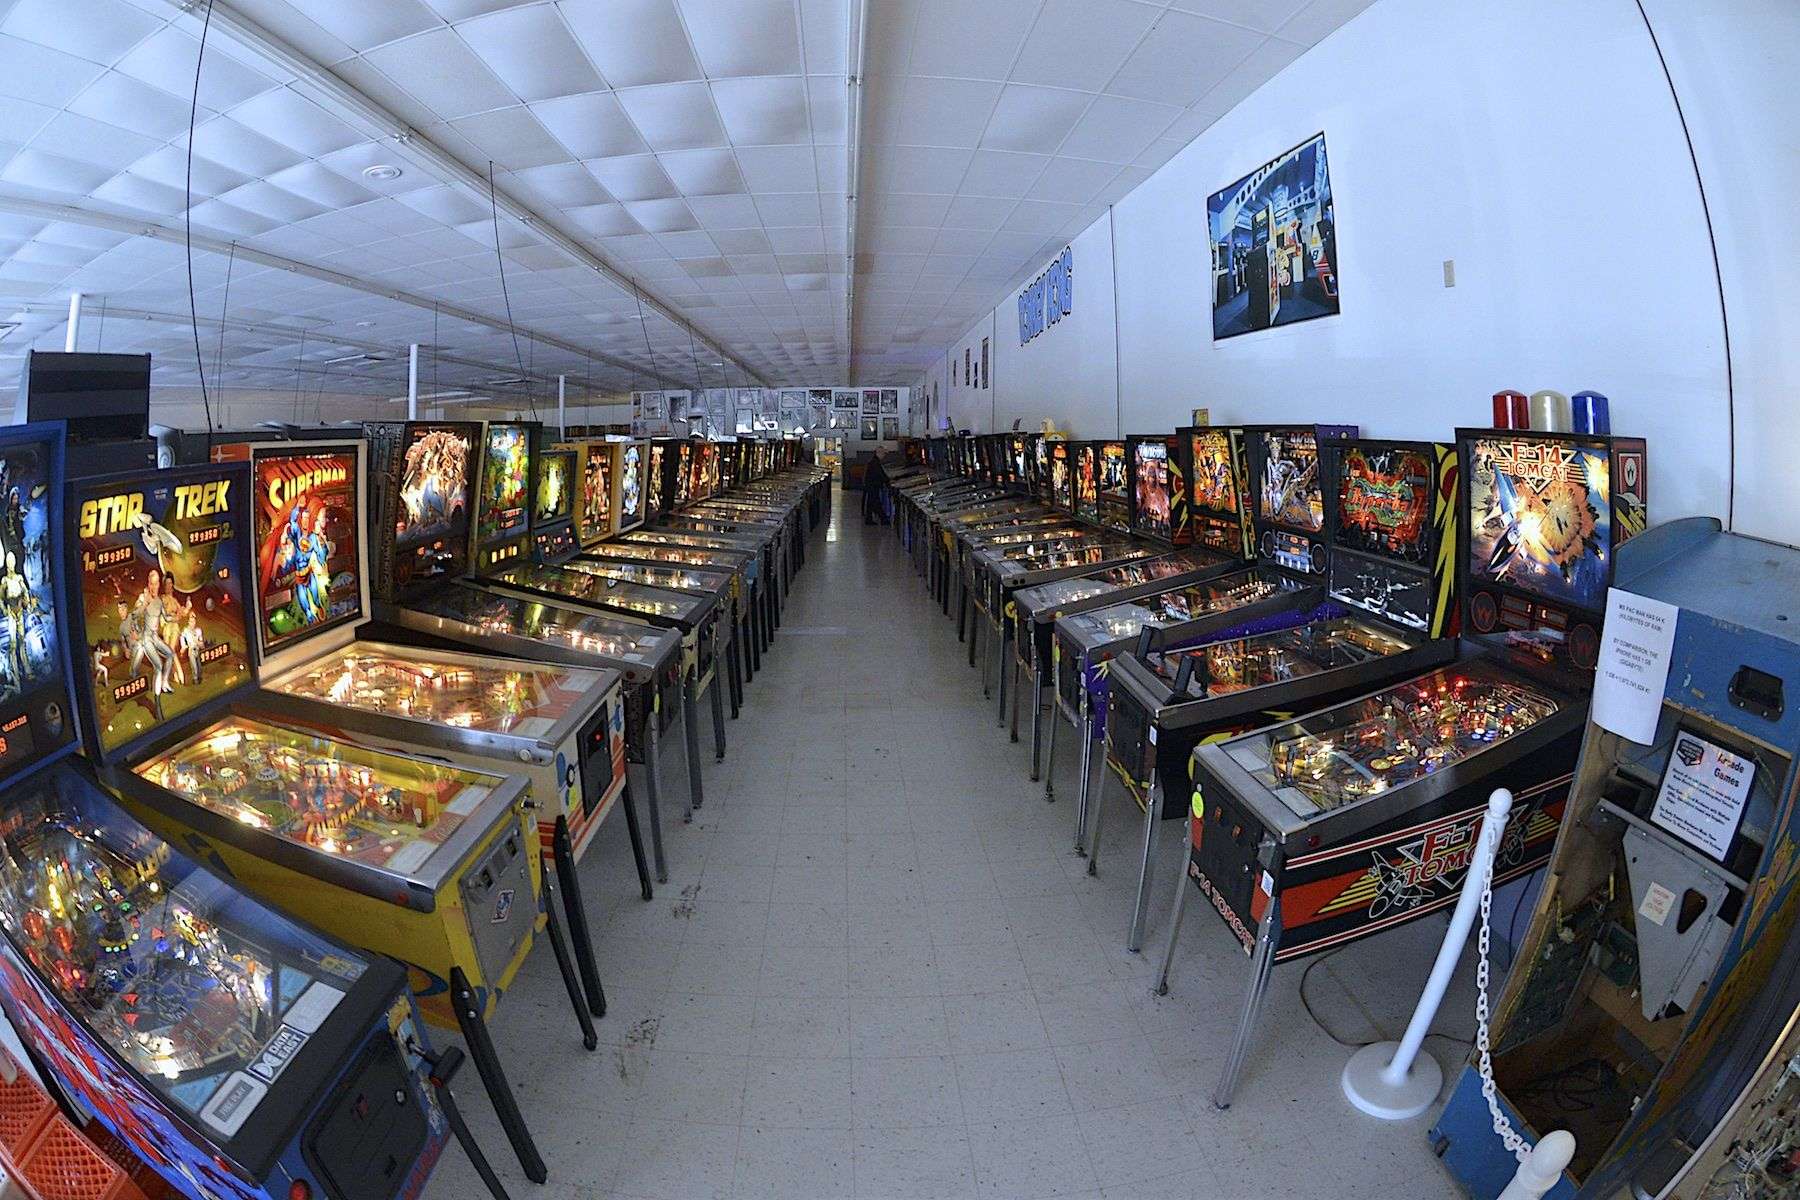 Some of the many views of Pinball PA!